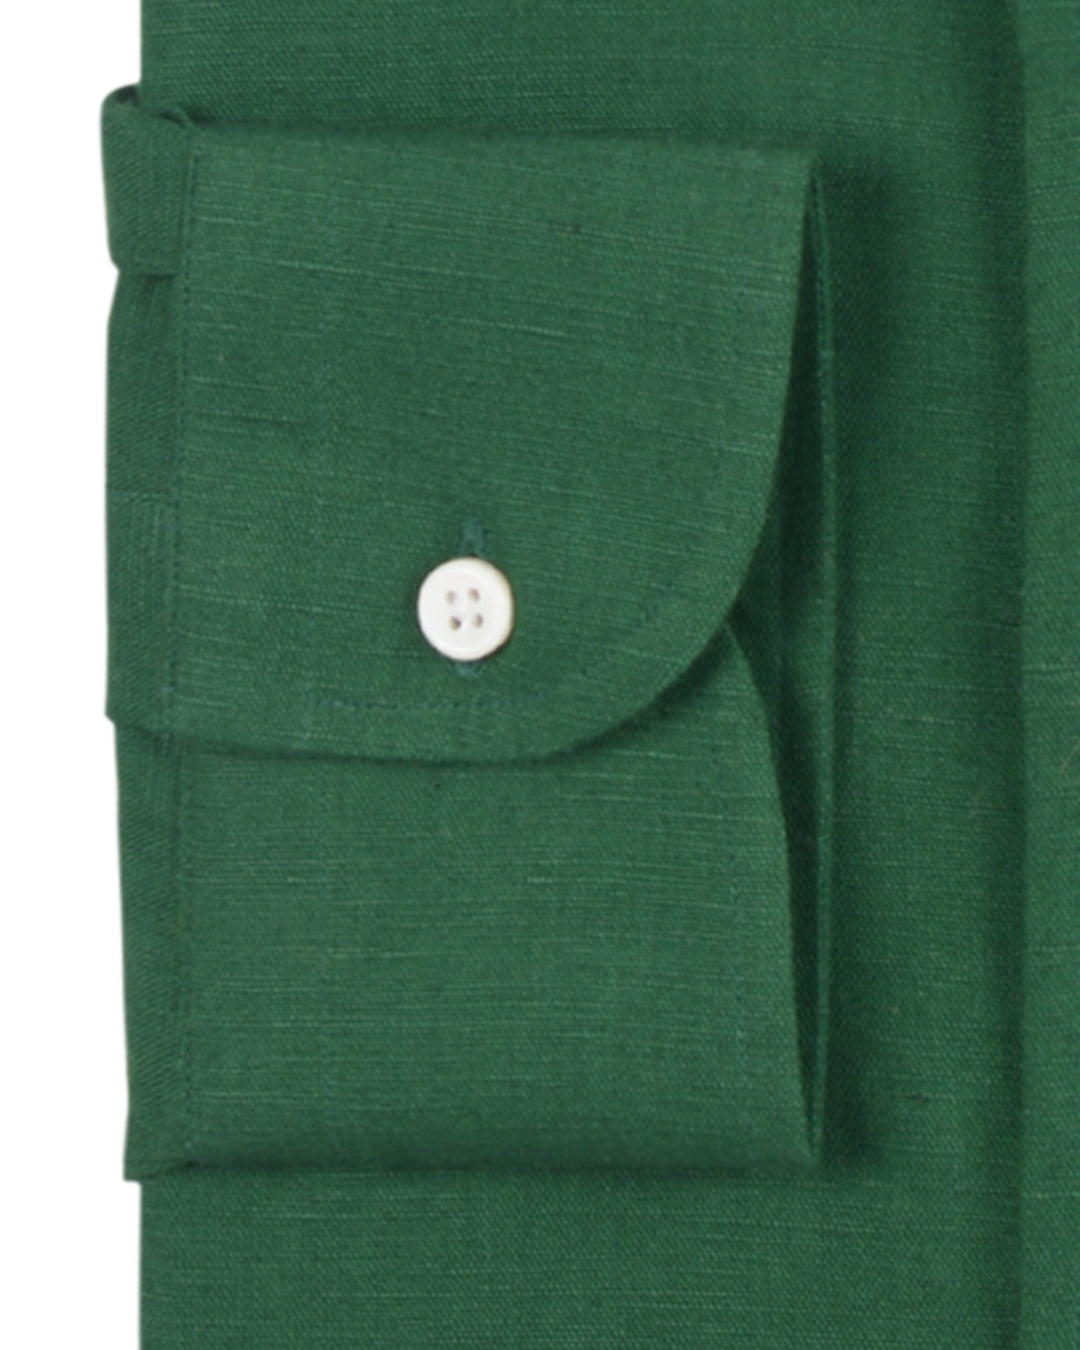 Cuff of custom linen shirt for men in forrest green by Luxire Clothing